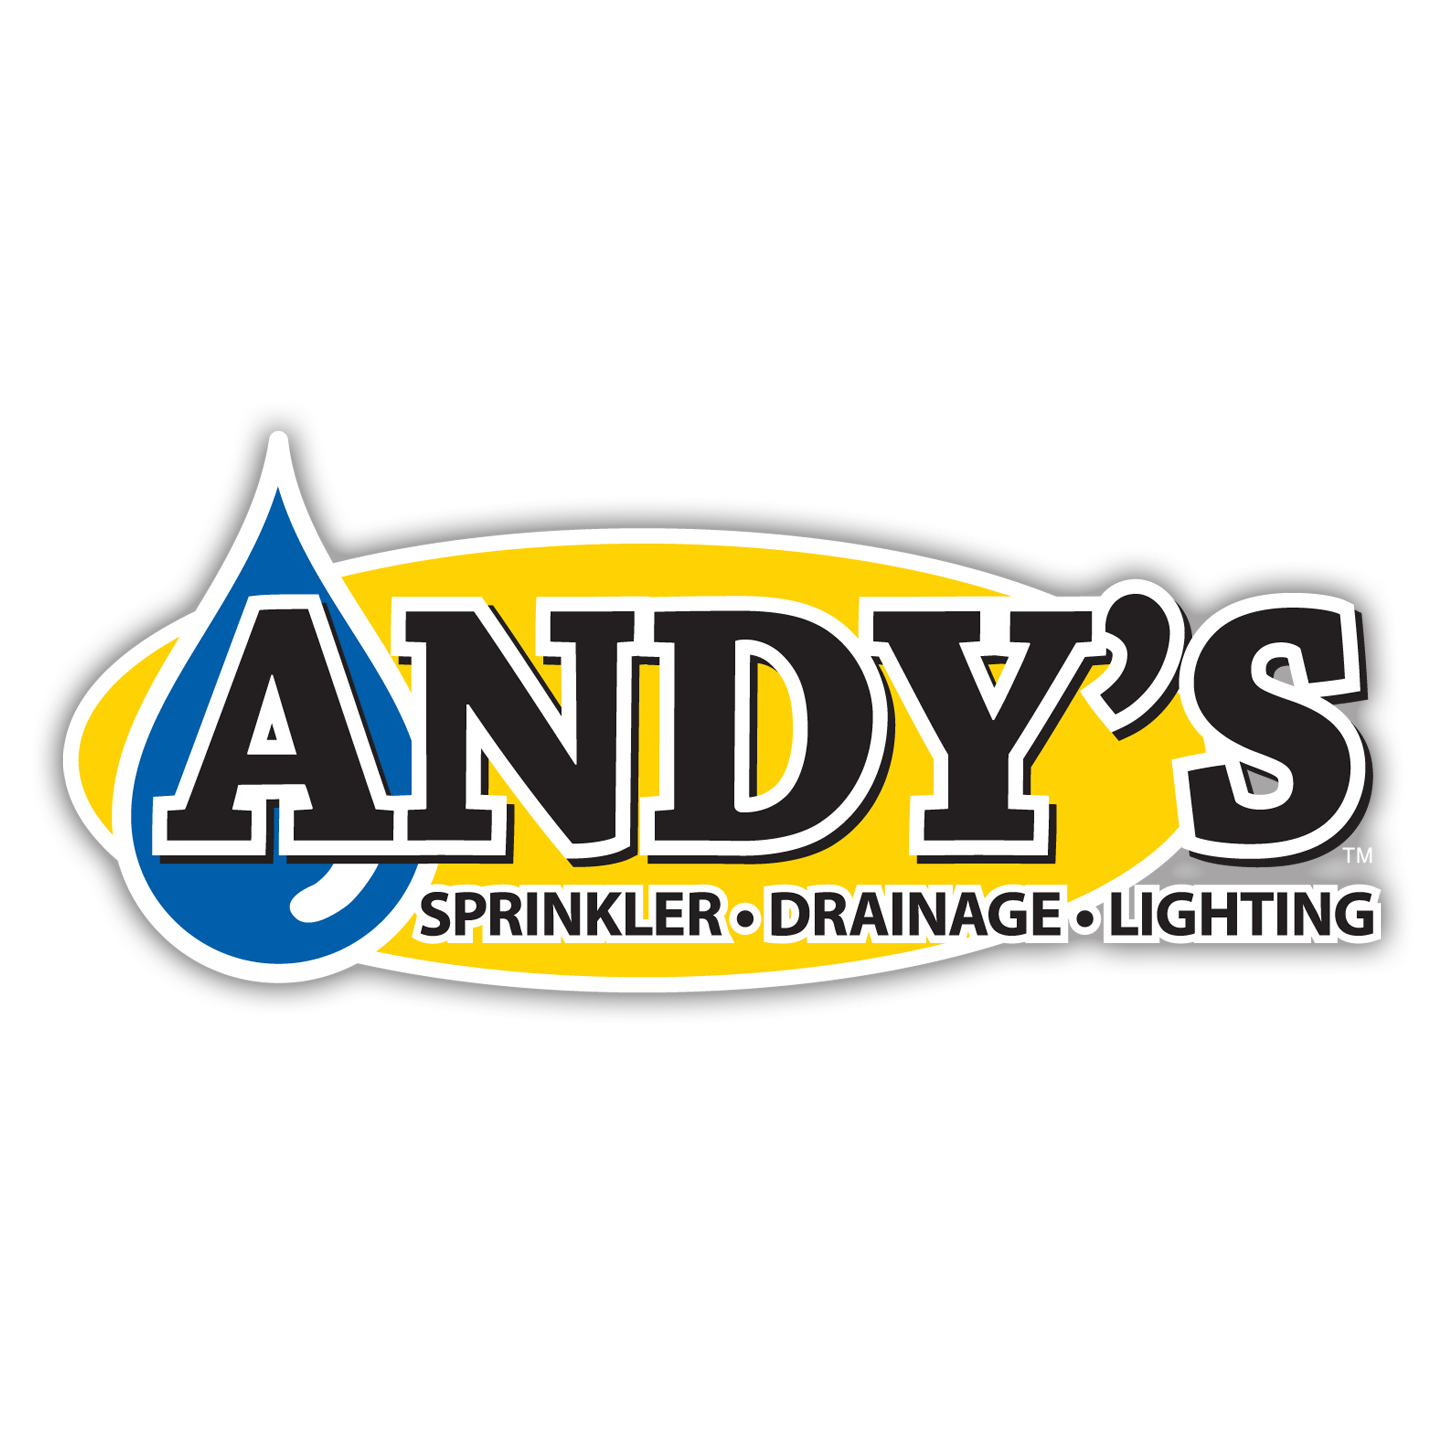 Andy's Sprinkler, Drainage & Lighting - Southlake, TX 76092 - (855)524-0687 | ShowMeLocal.com